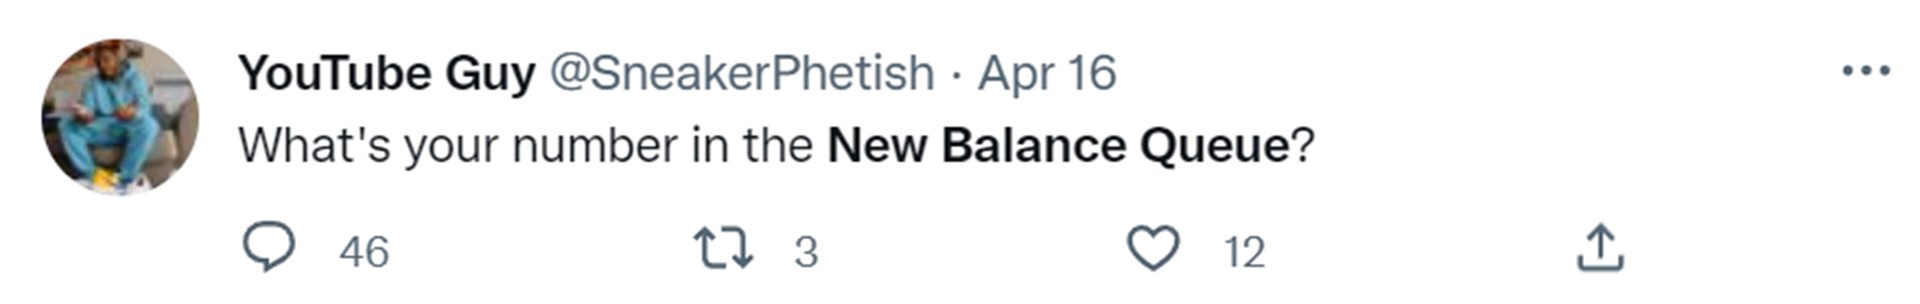 Tweet saying what's your number in the New Balance queue?